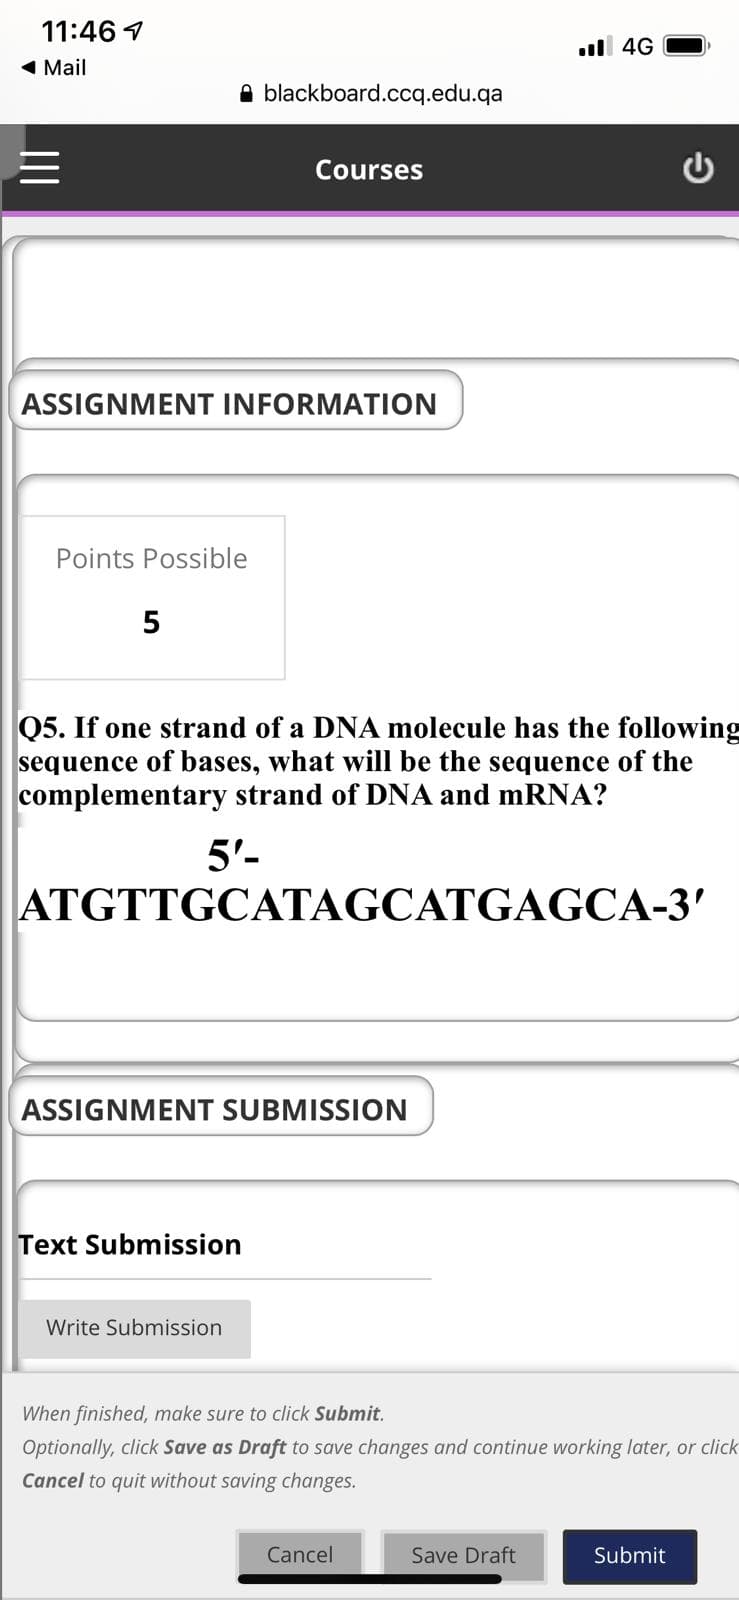 11:46 1
ul 4G
1 Mail
A blackboard.ccq.edu.qa
Courses
ASSIGNMENT INFORMATION
Points Possible
5
Q5. If one strand of a DNA molecule has the following
sequence of bases, what will be the sequence of the
complementary strand of DNA and mRNA?
5'-
ATGTTGCATAGCATGAGCA-3'
ASSIGNMENT SUBMISSION
Text Submission
Write Submission
When finished, make sure to click Submit.
Optionally, click Save as Draft to save changes and continue working later, or click
Cancel to quit without saving changes.
Cancel
Save Draft
Submit
